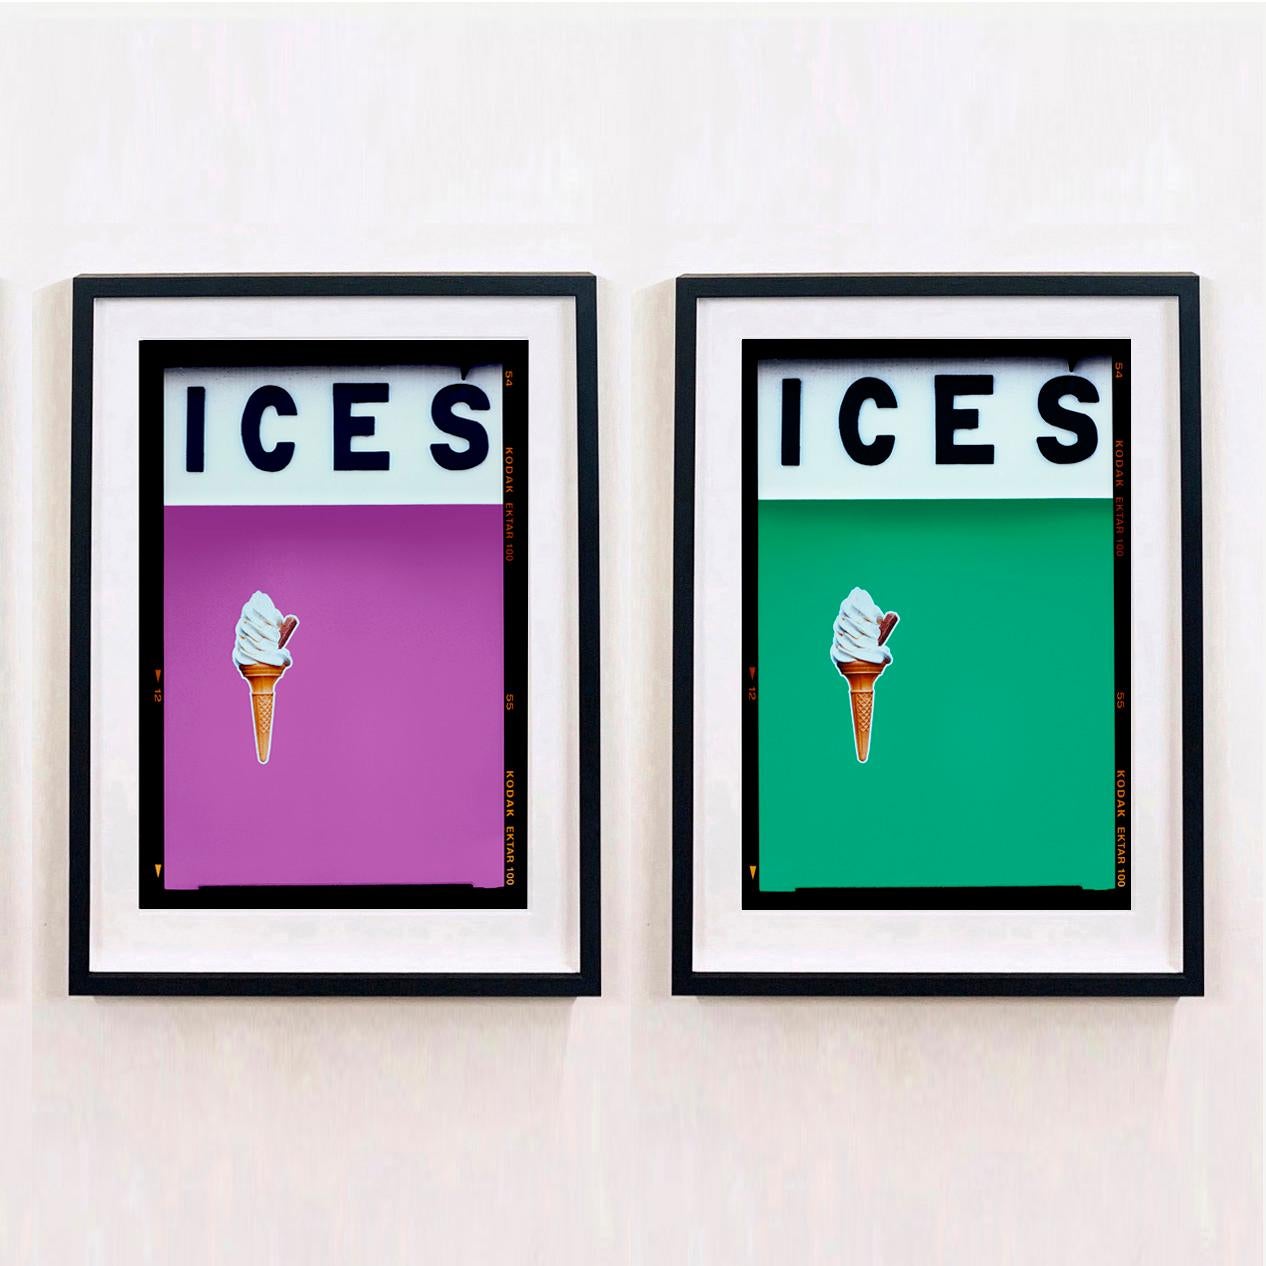 Ices (Plum), Bexhill-on-Sea - British seaside color photography For Sale 3